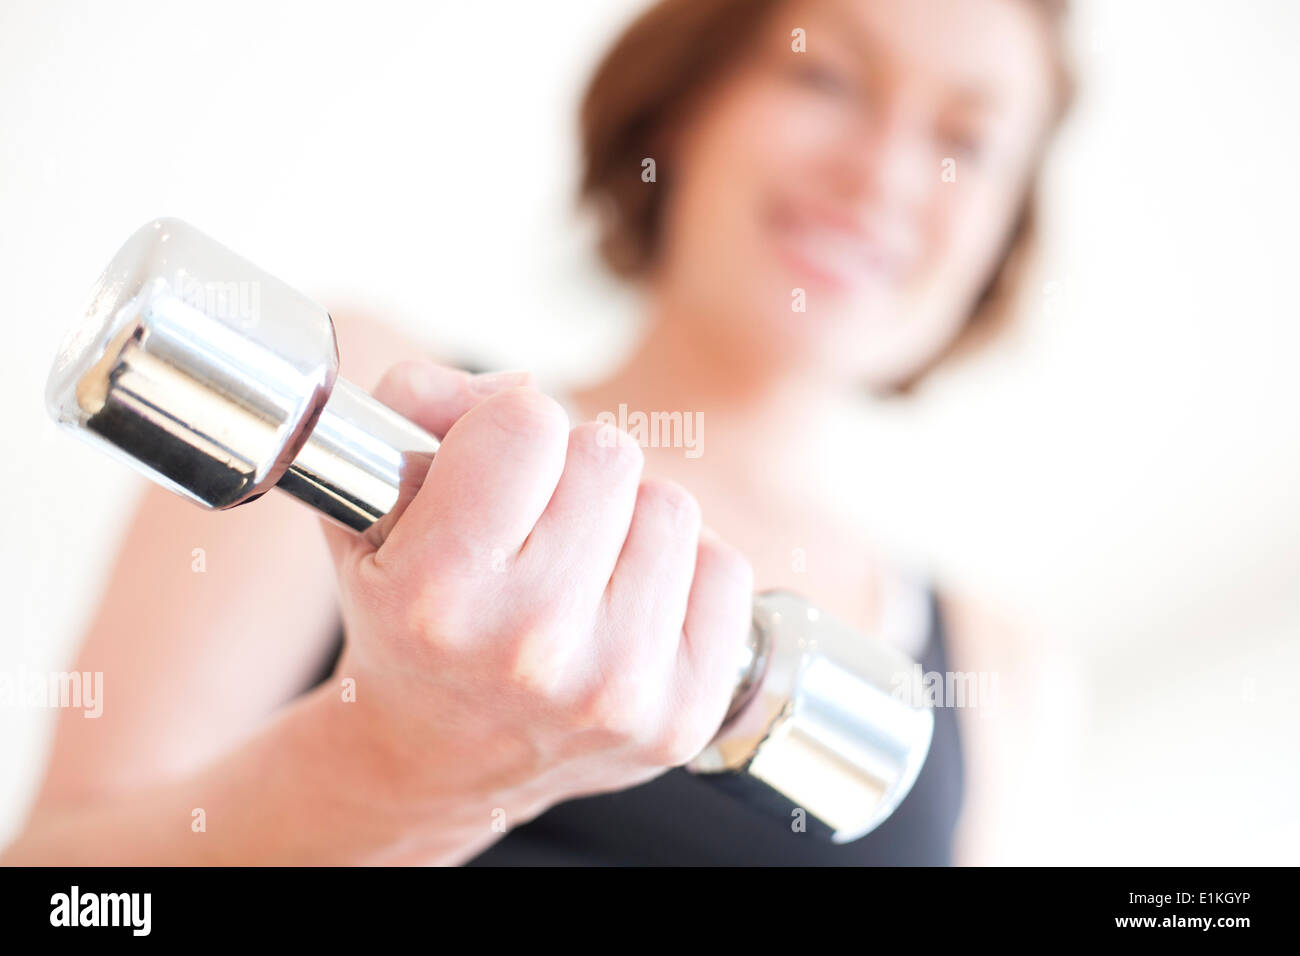 MODEL RELEASED Woman using hand weight. Stock Photo